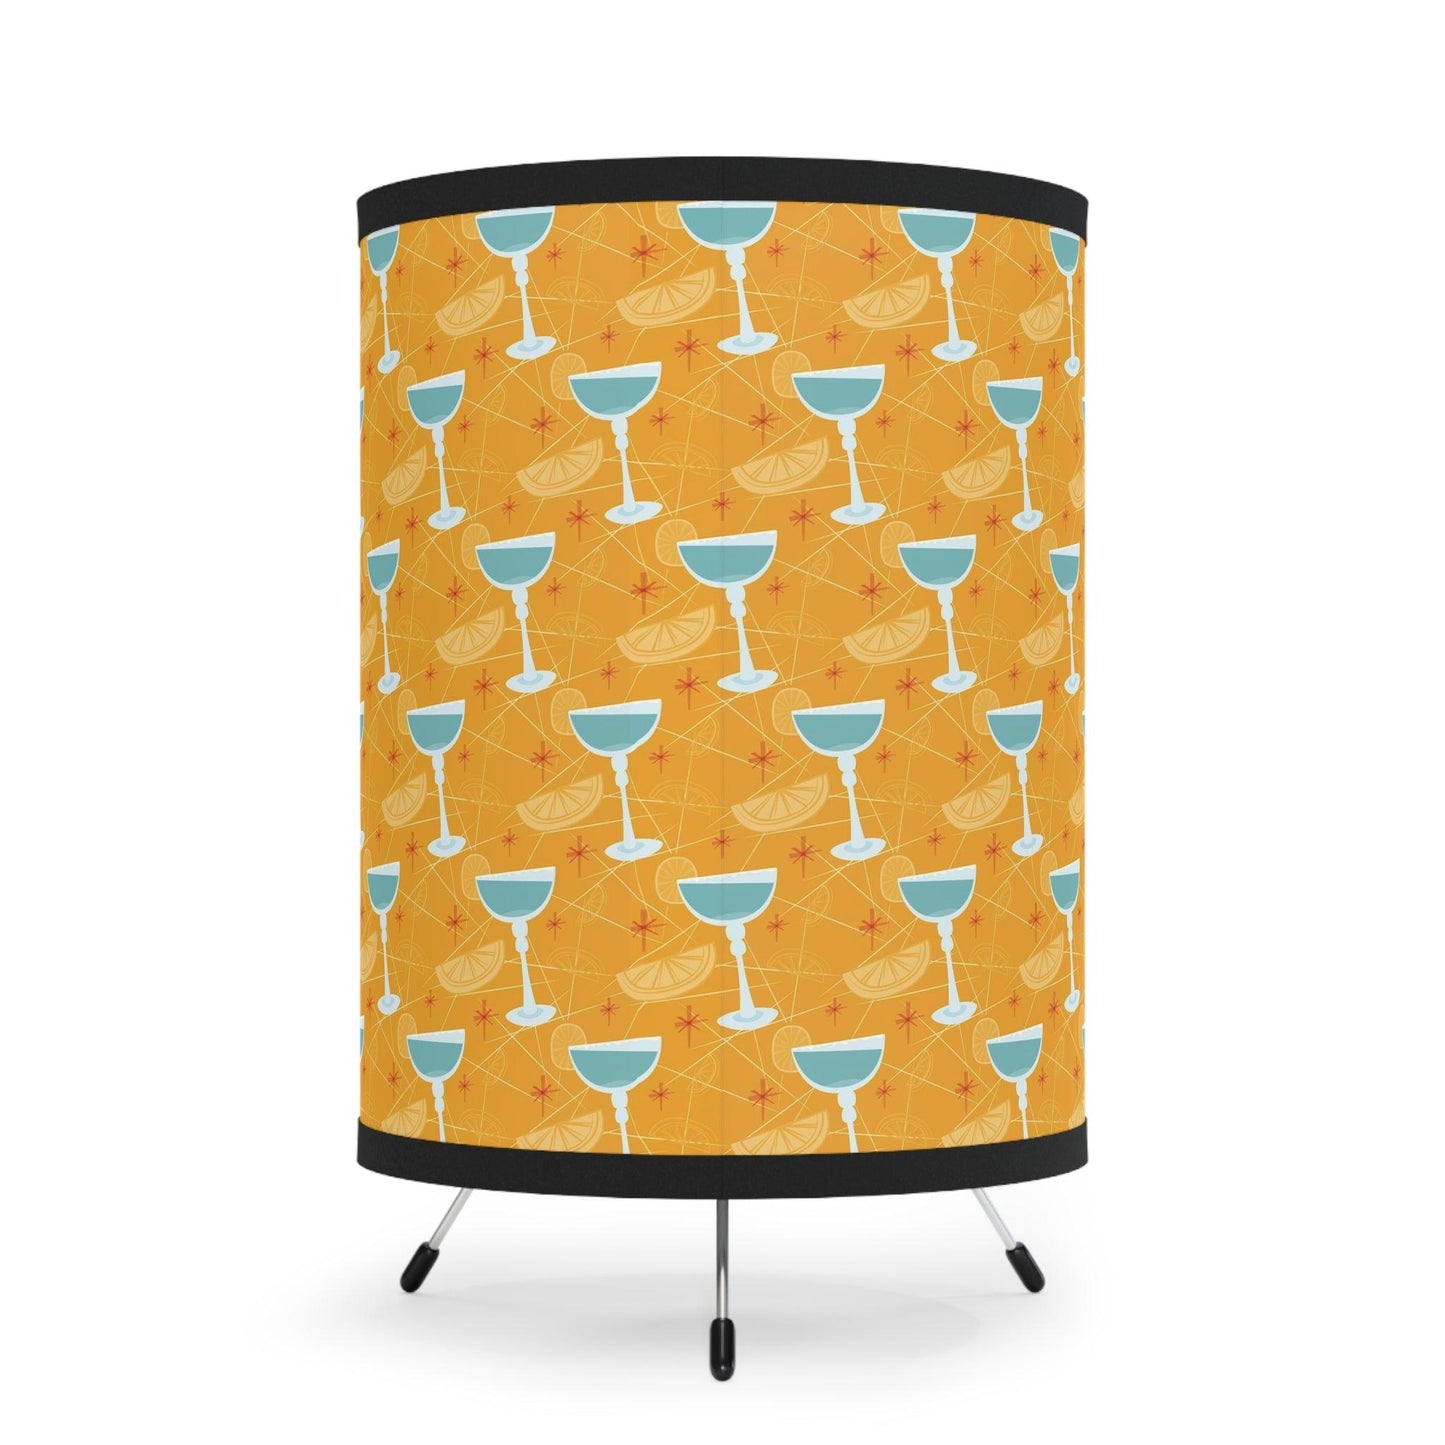 Retro 50s Kitsch Mid Century Cocktails Yellow and Blue Tabletop Accent Lamp | lovevisionkarma.com